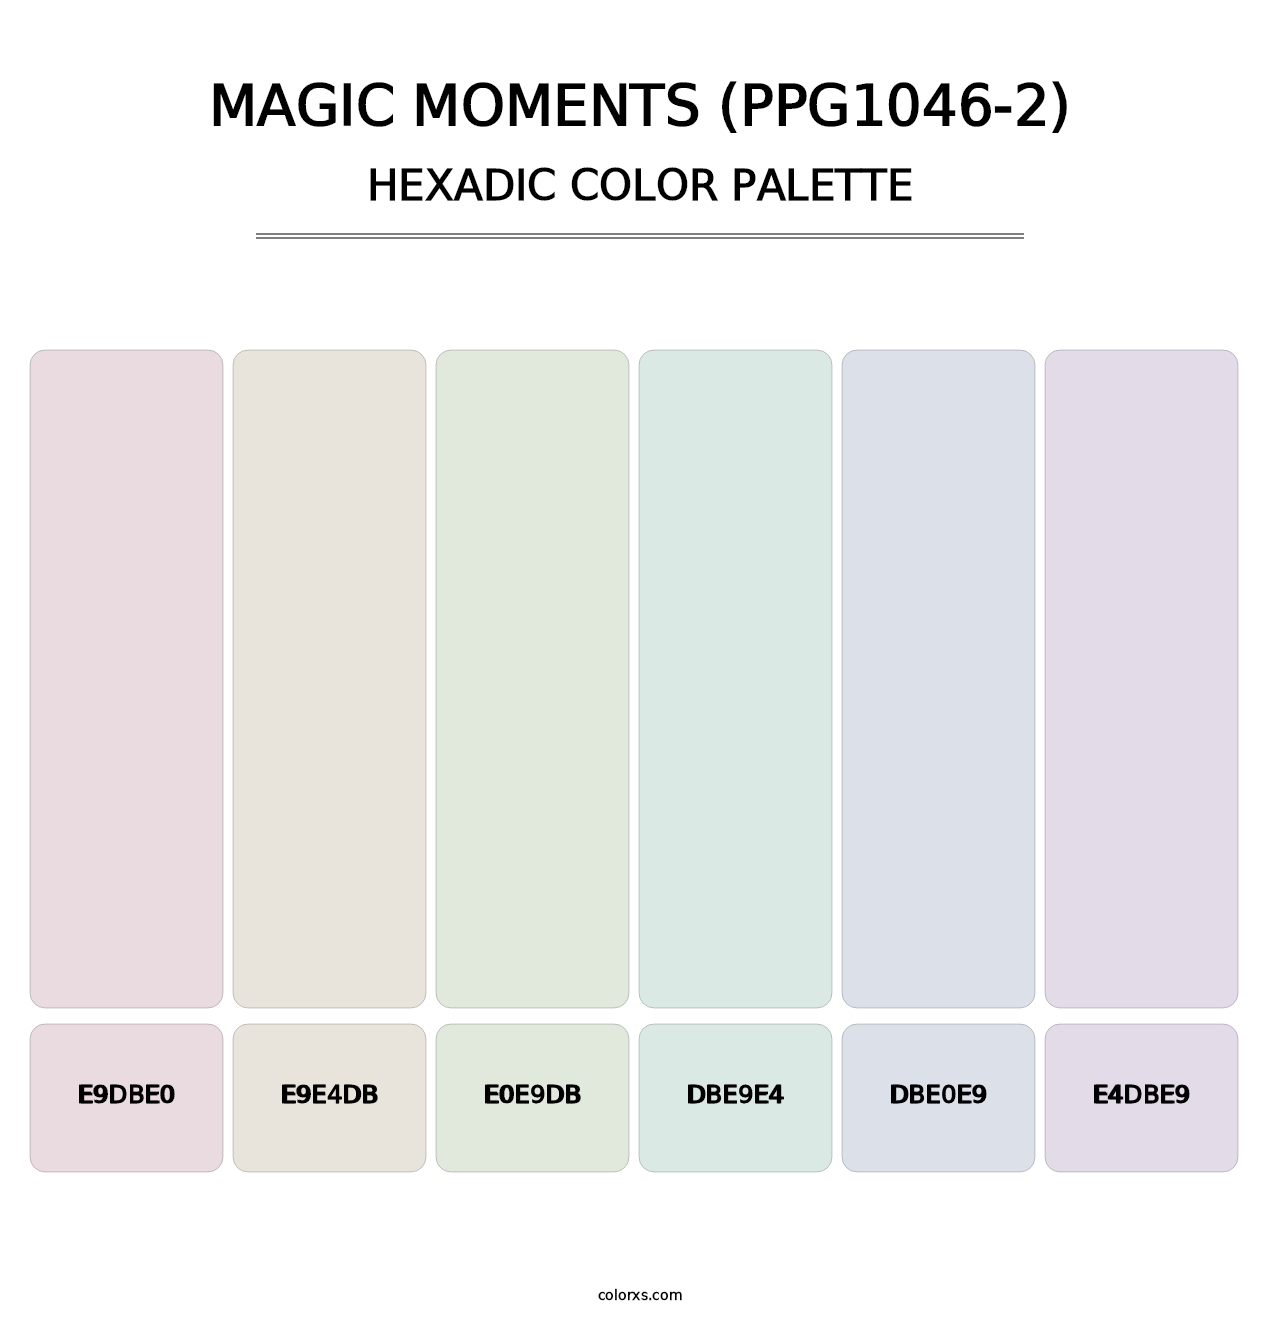 Magic Moments (PPG1046-2) - Hexadic Color Palette